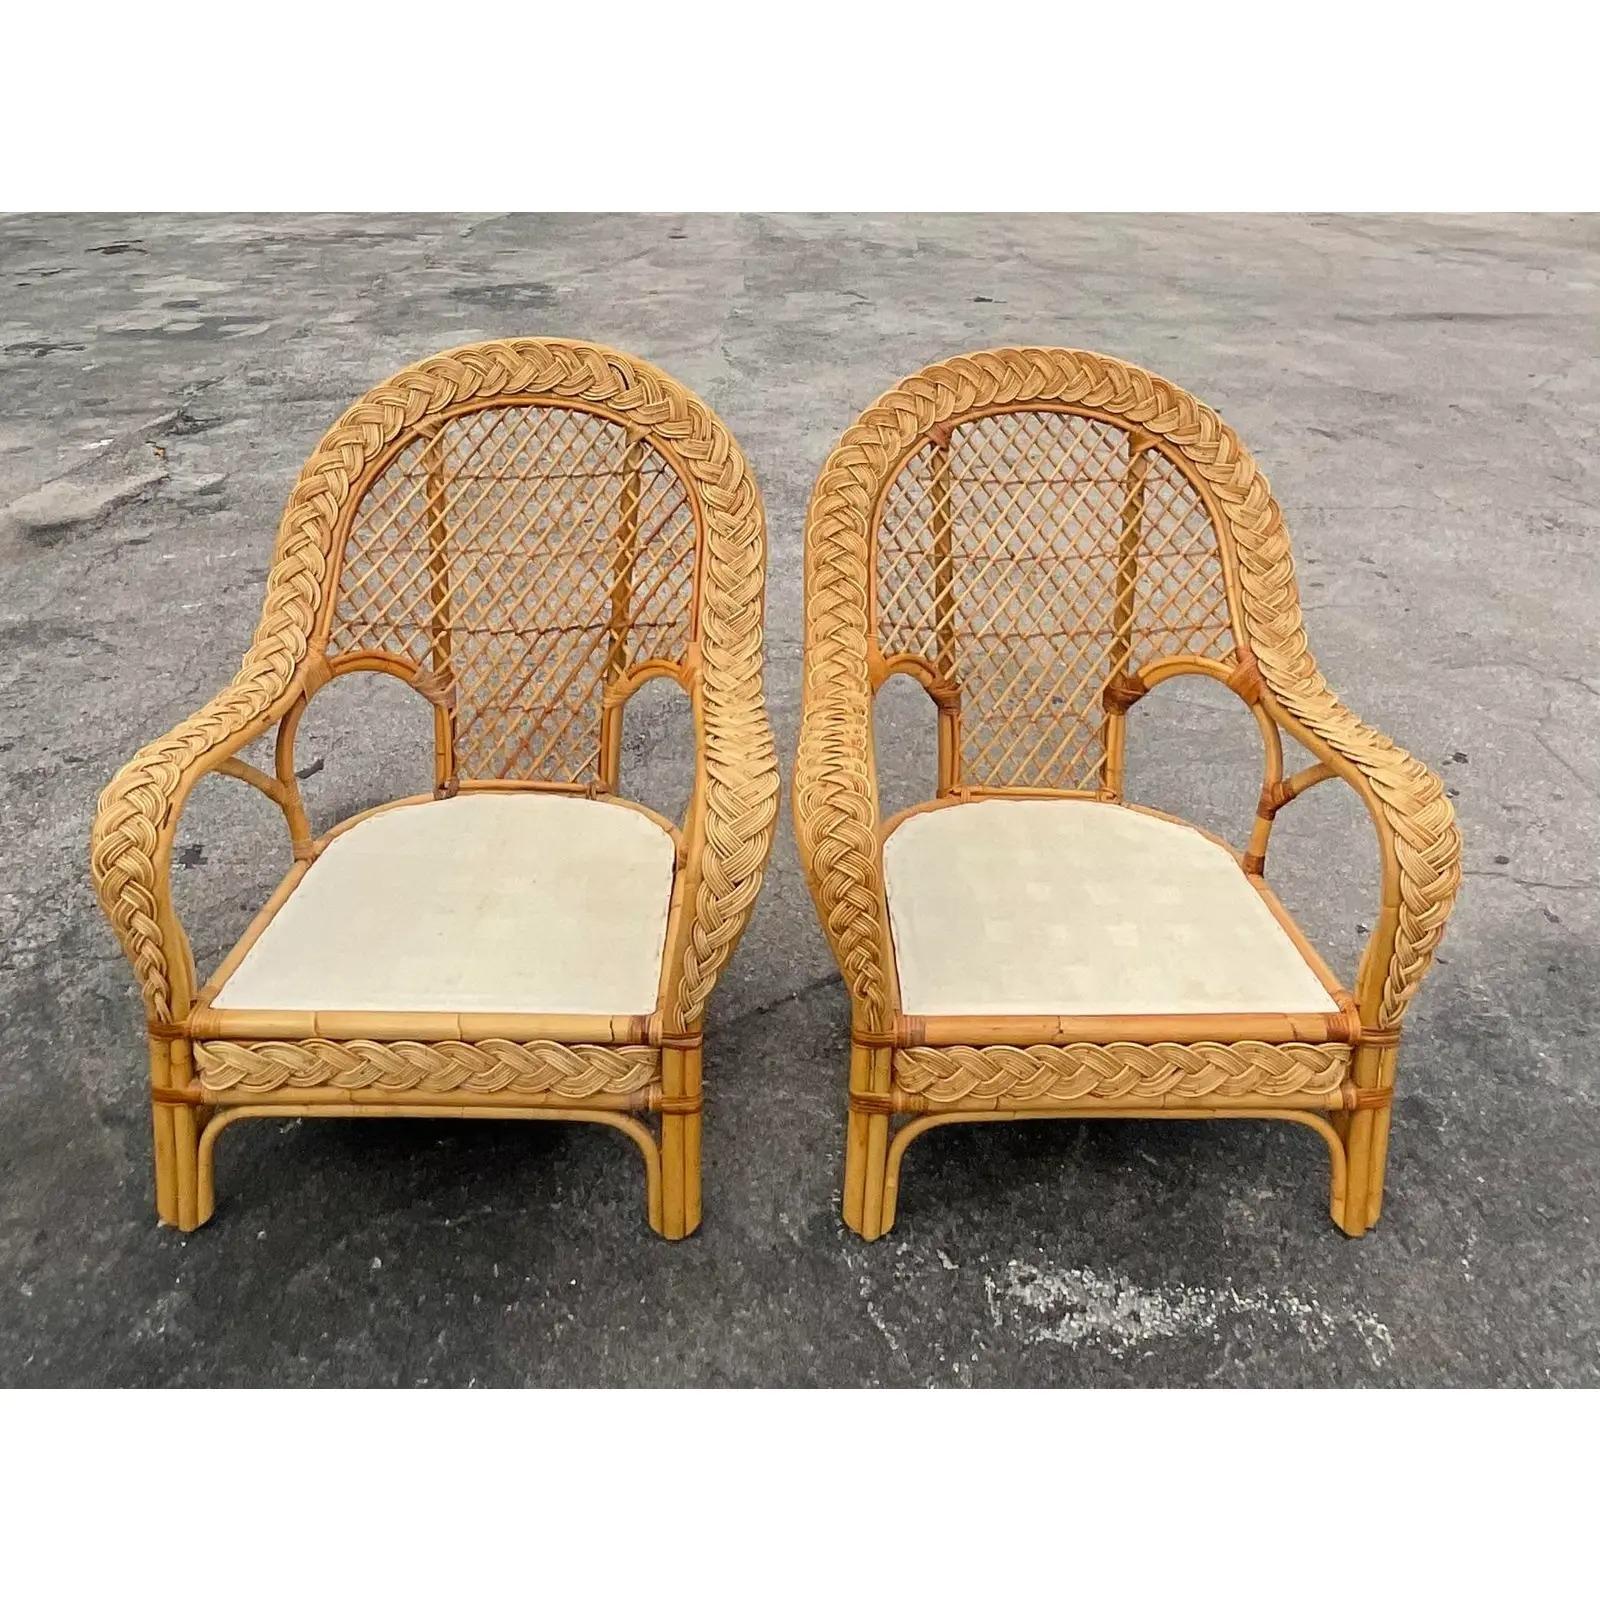 Philippine Vintage Coastal Braided Rattan Paddle Back Lounge Chairs - a Pair